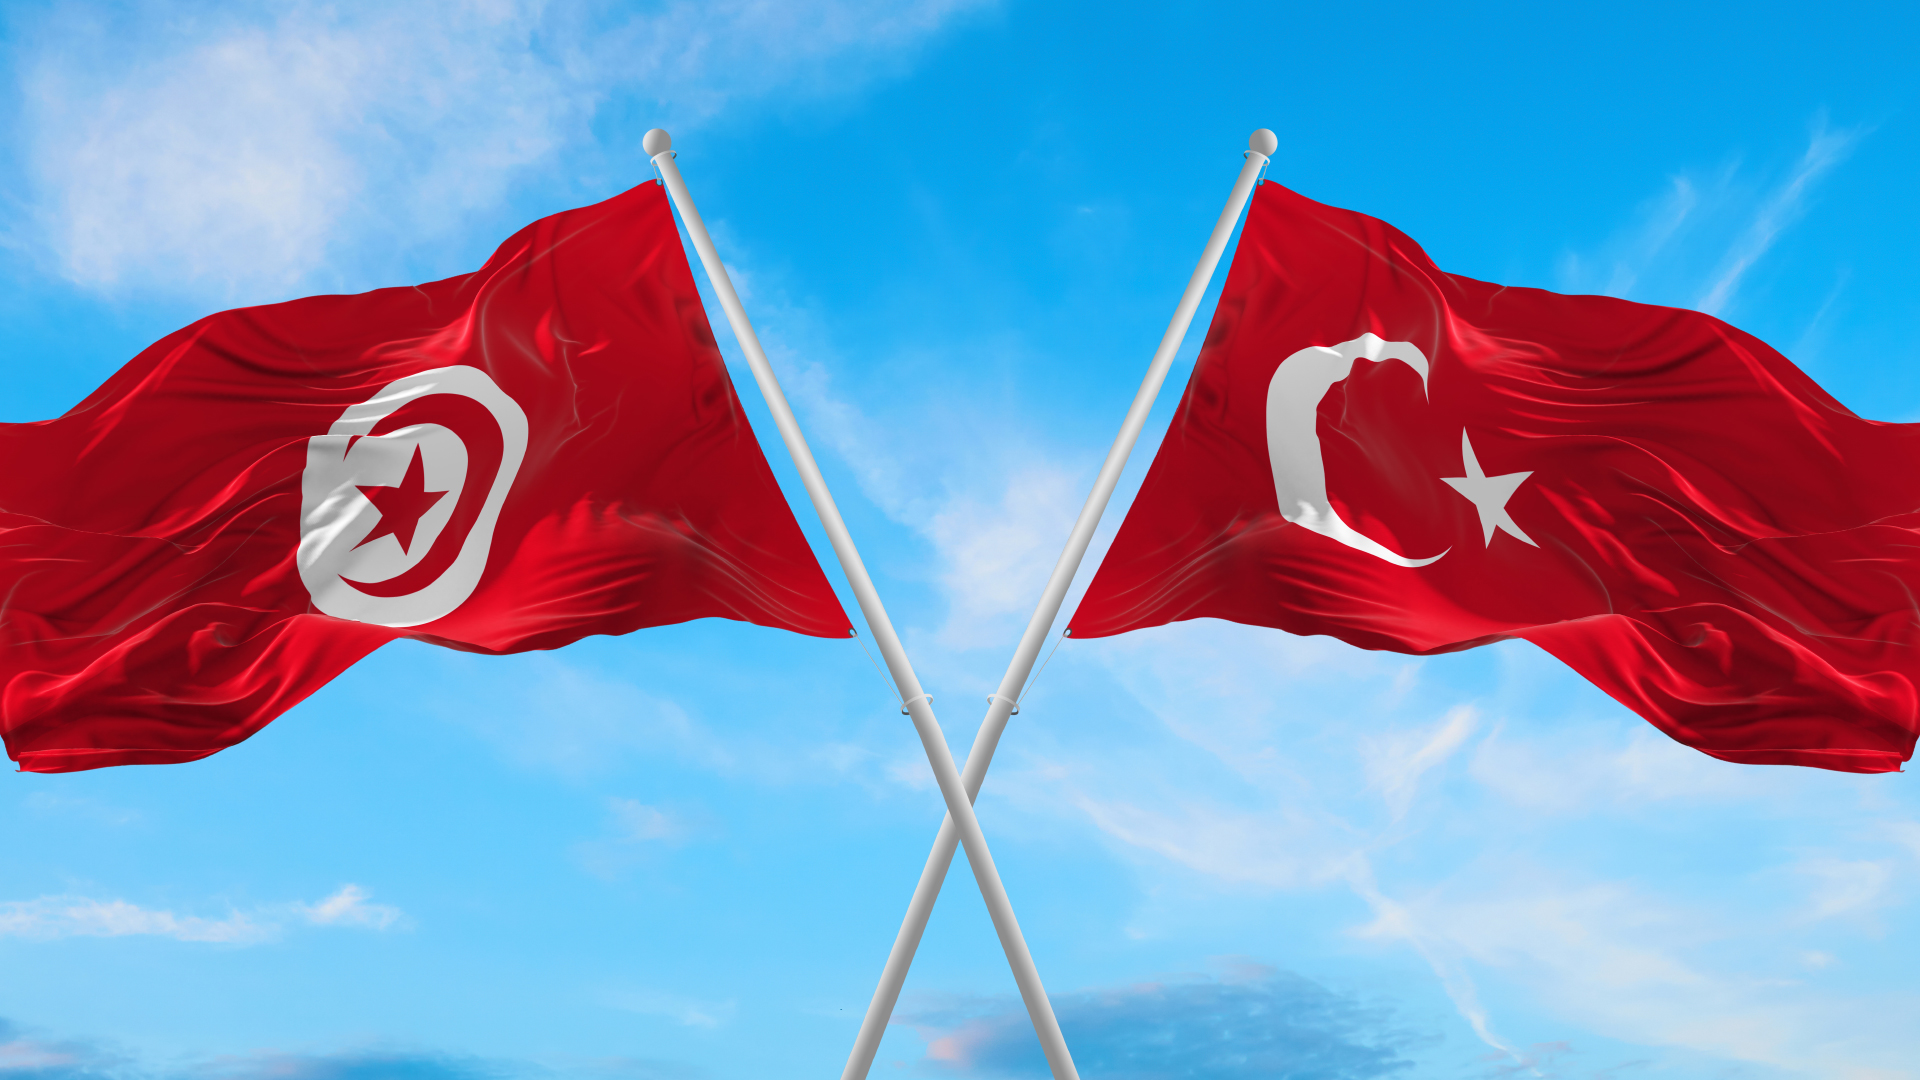 Tunisia and Turkey, two key destinations for medical tourism